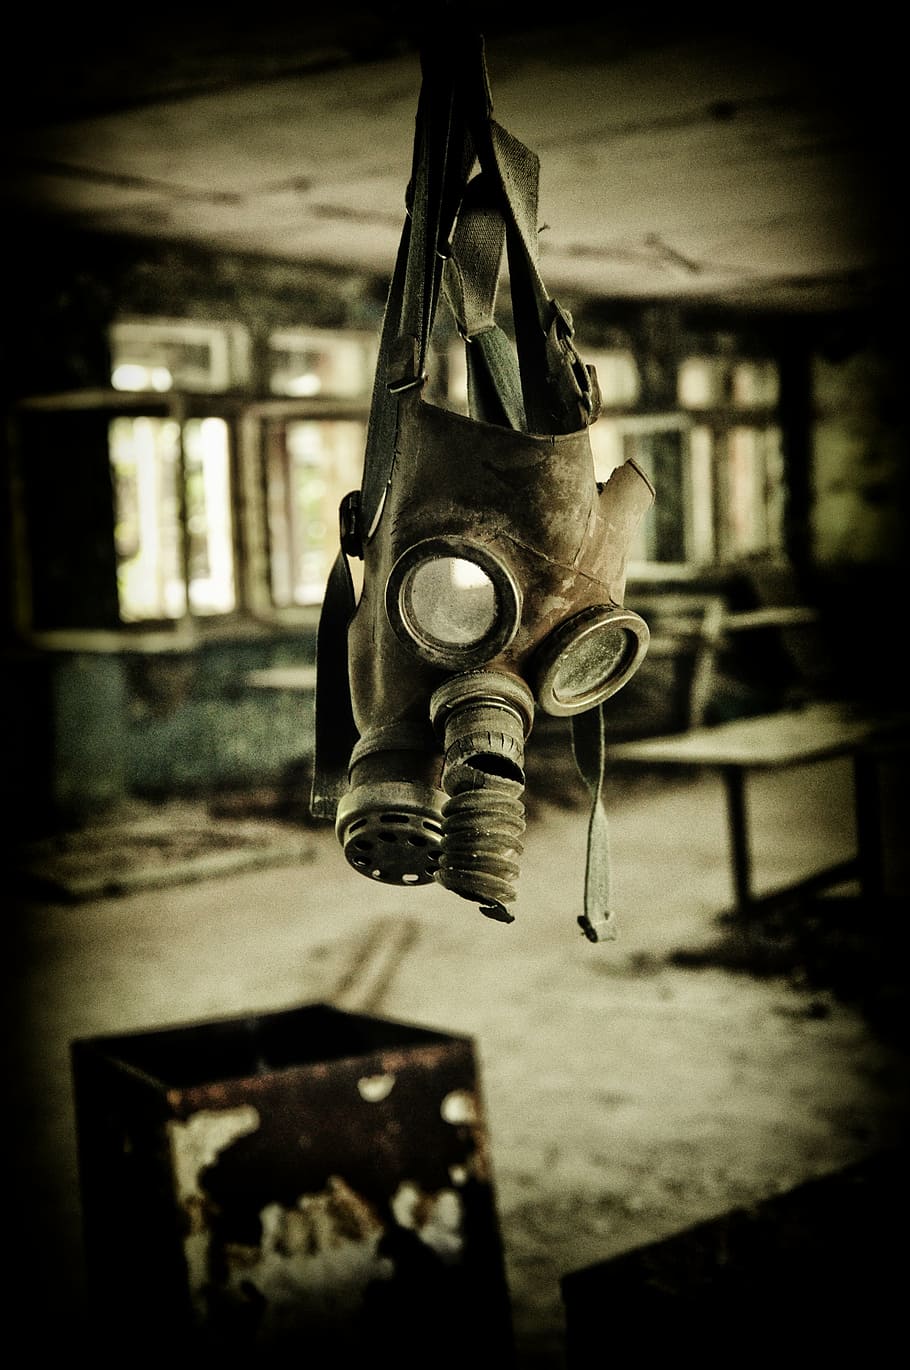 selective, focus, hanged, gas mask, pripyat, chernobyl, black And White, industry, dirty, focus on foreground